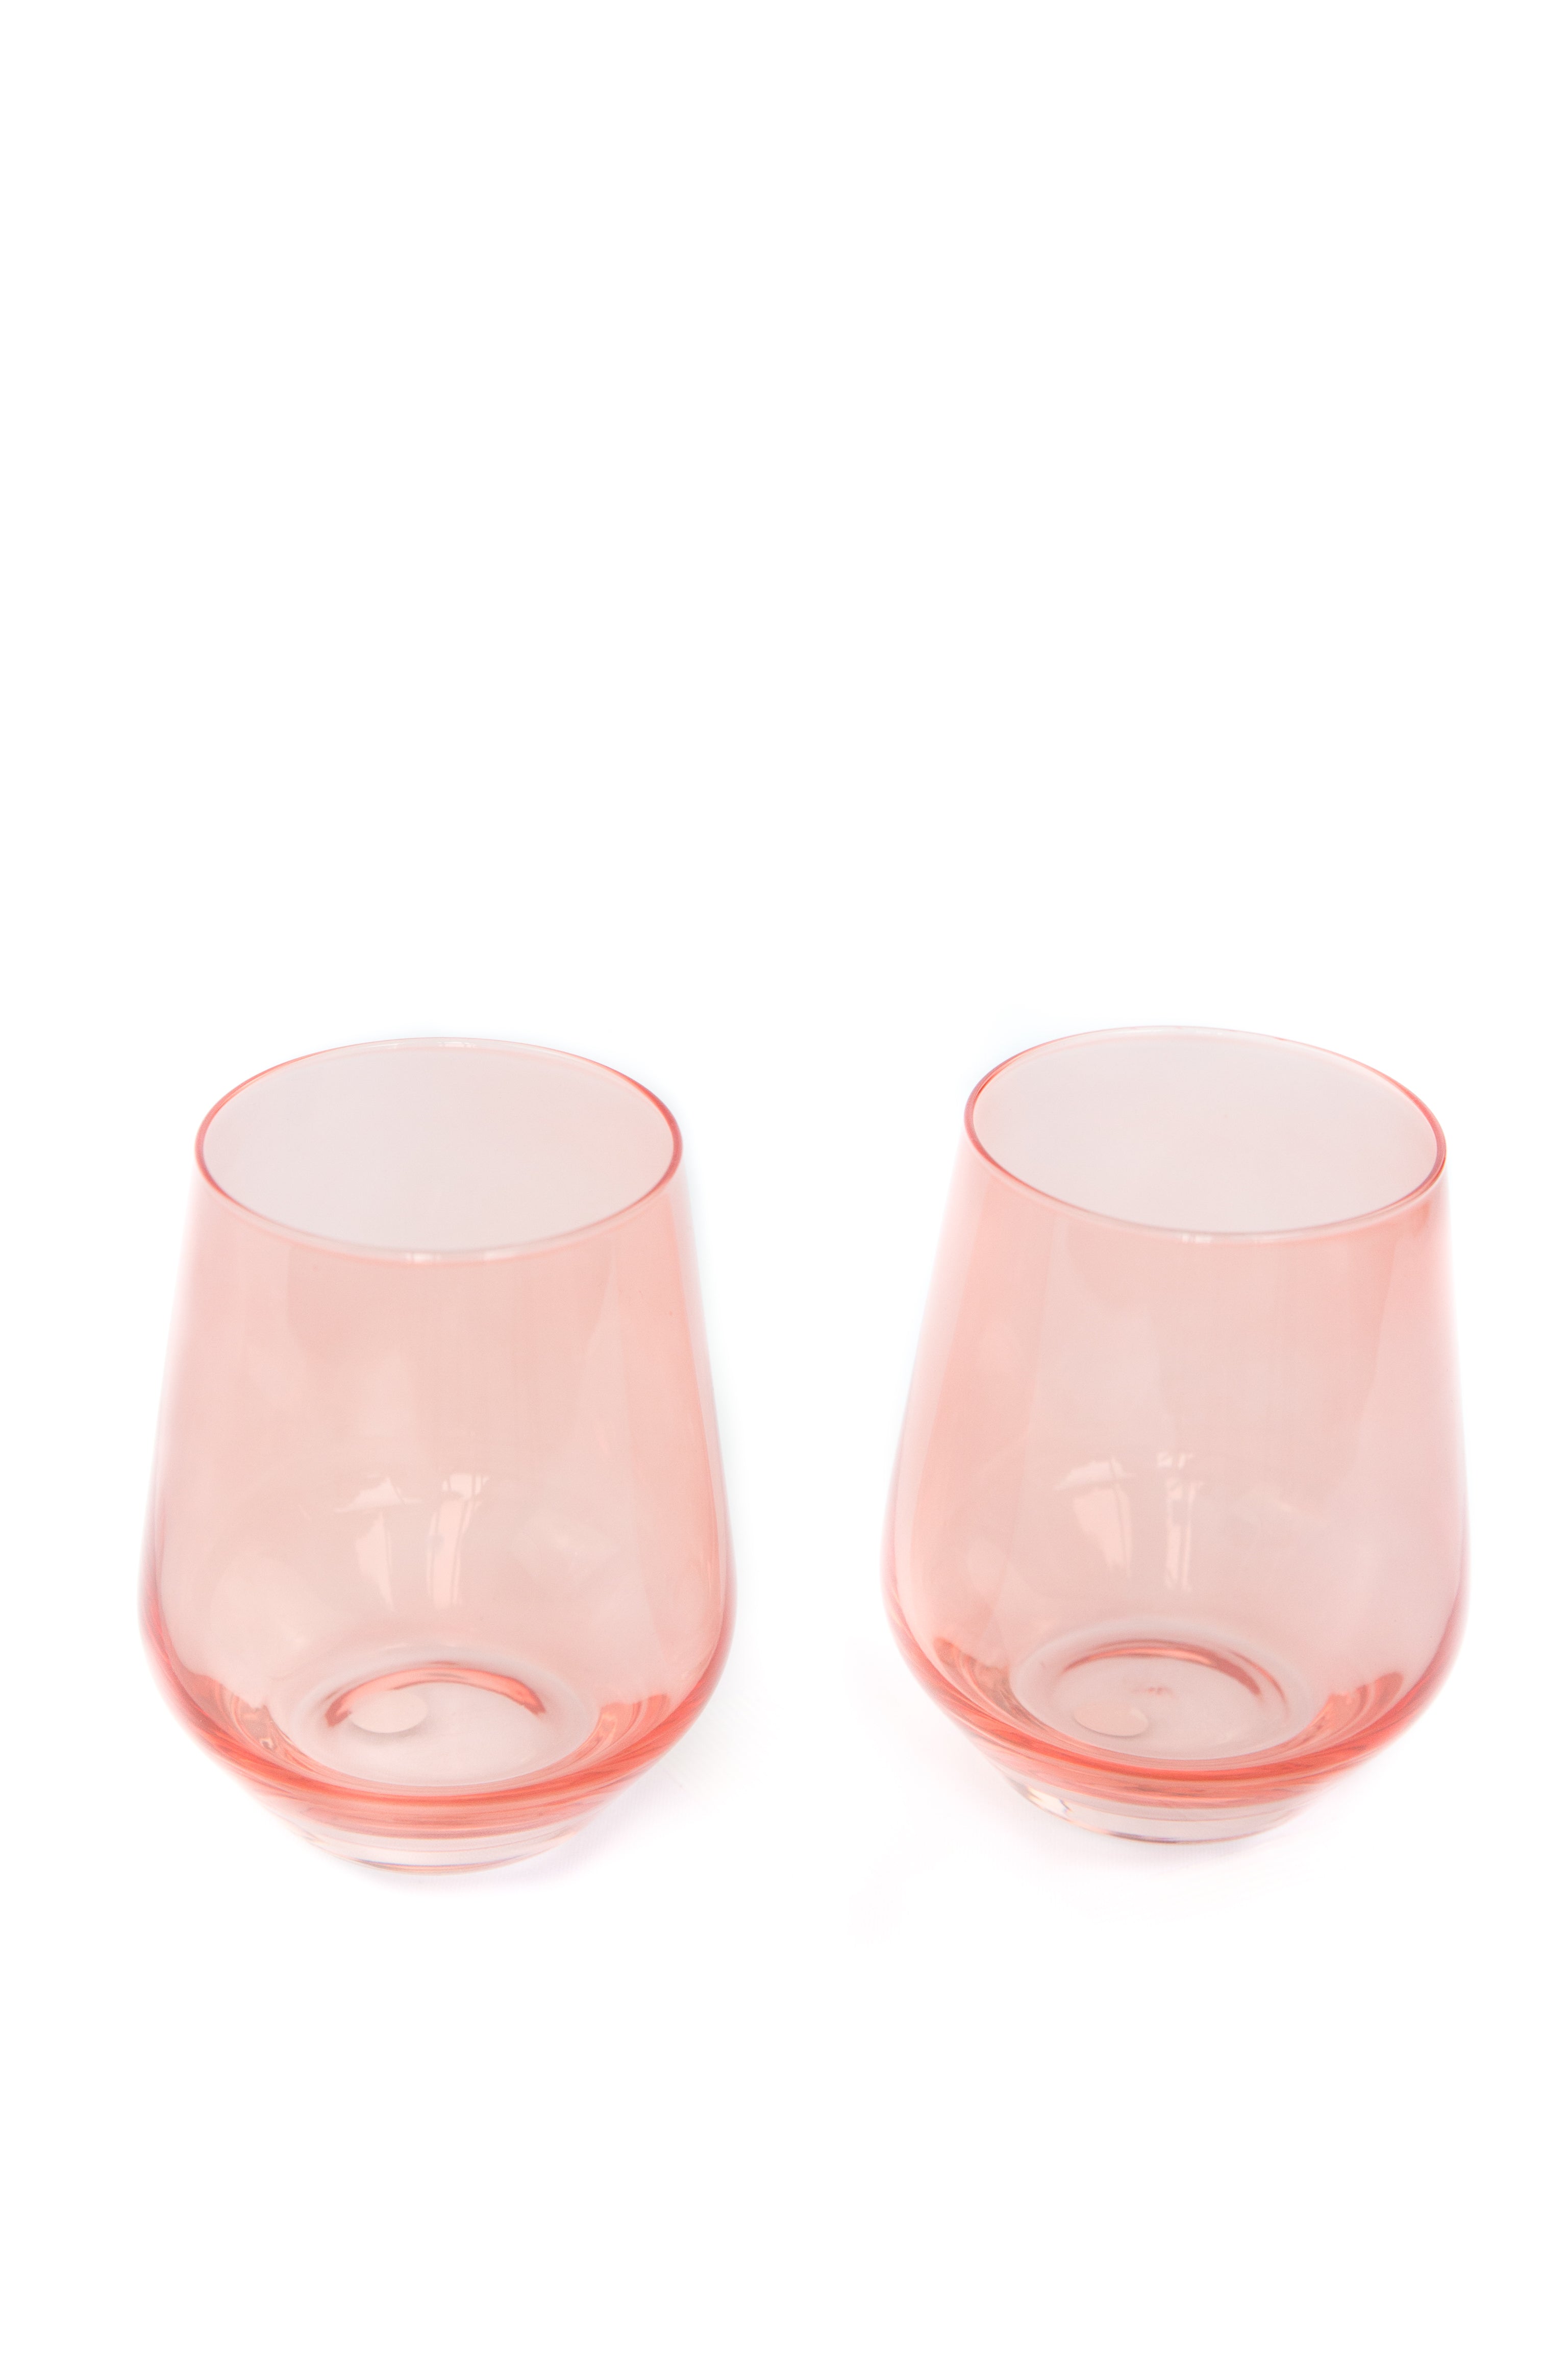 Estelle Colored Wine Stemless - Set of 2- Peach Fuzz {Our Coral Peach Pink}